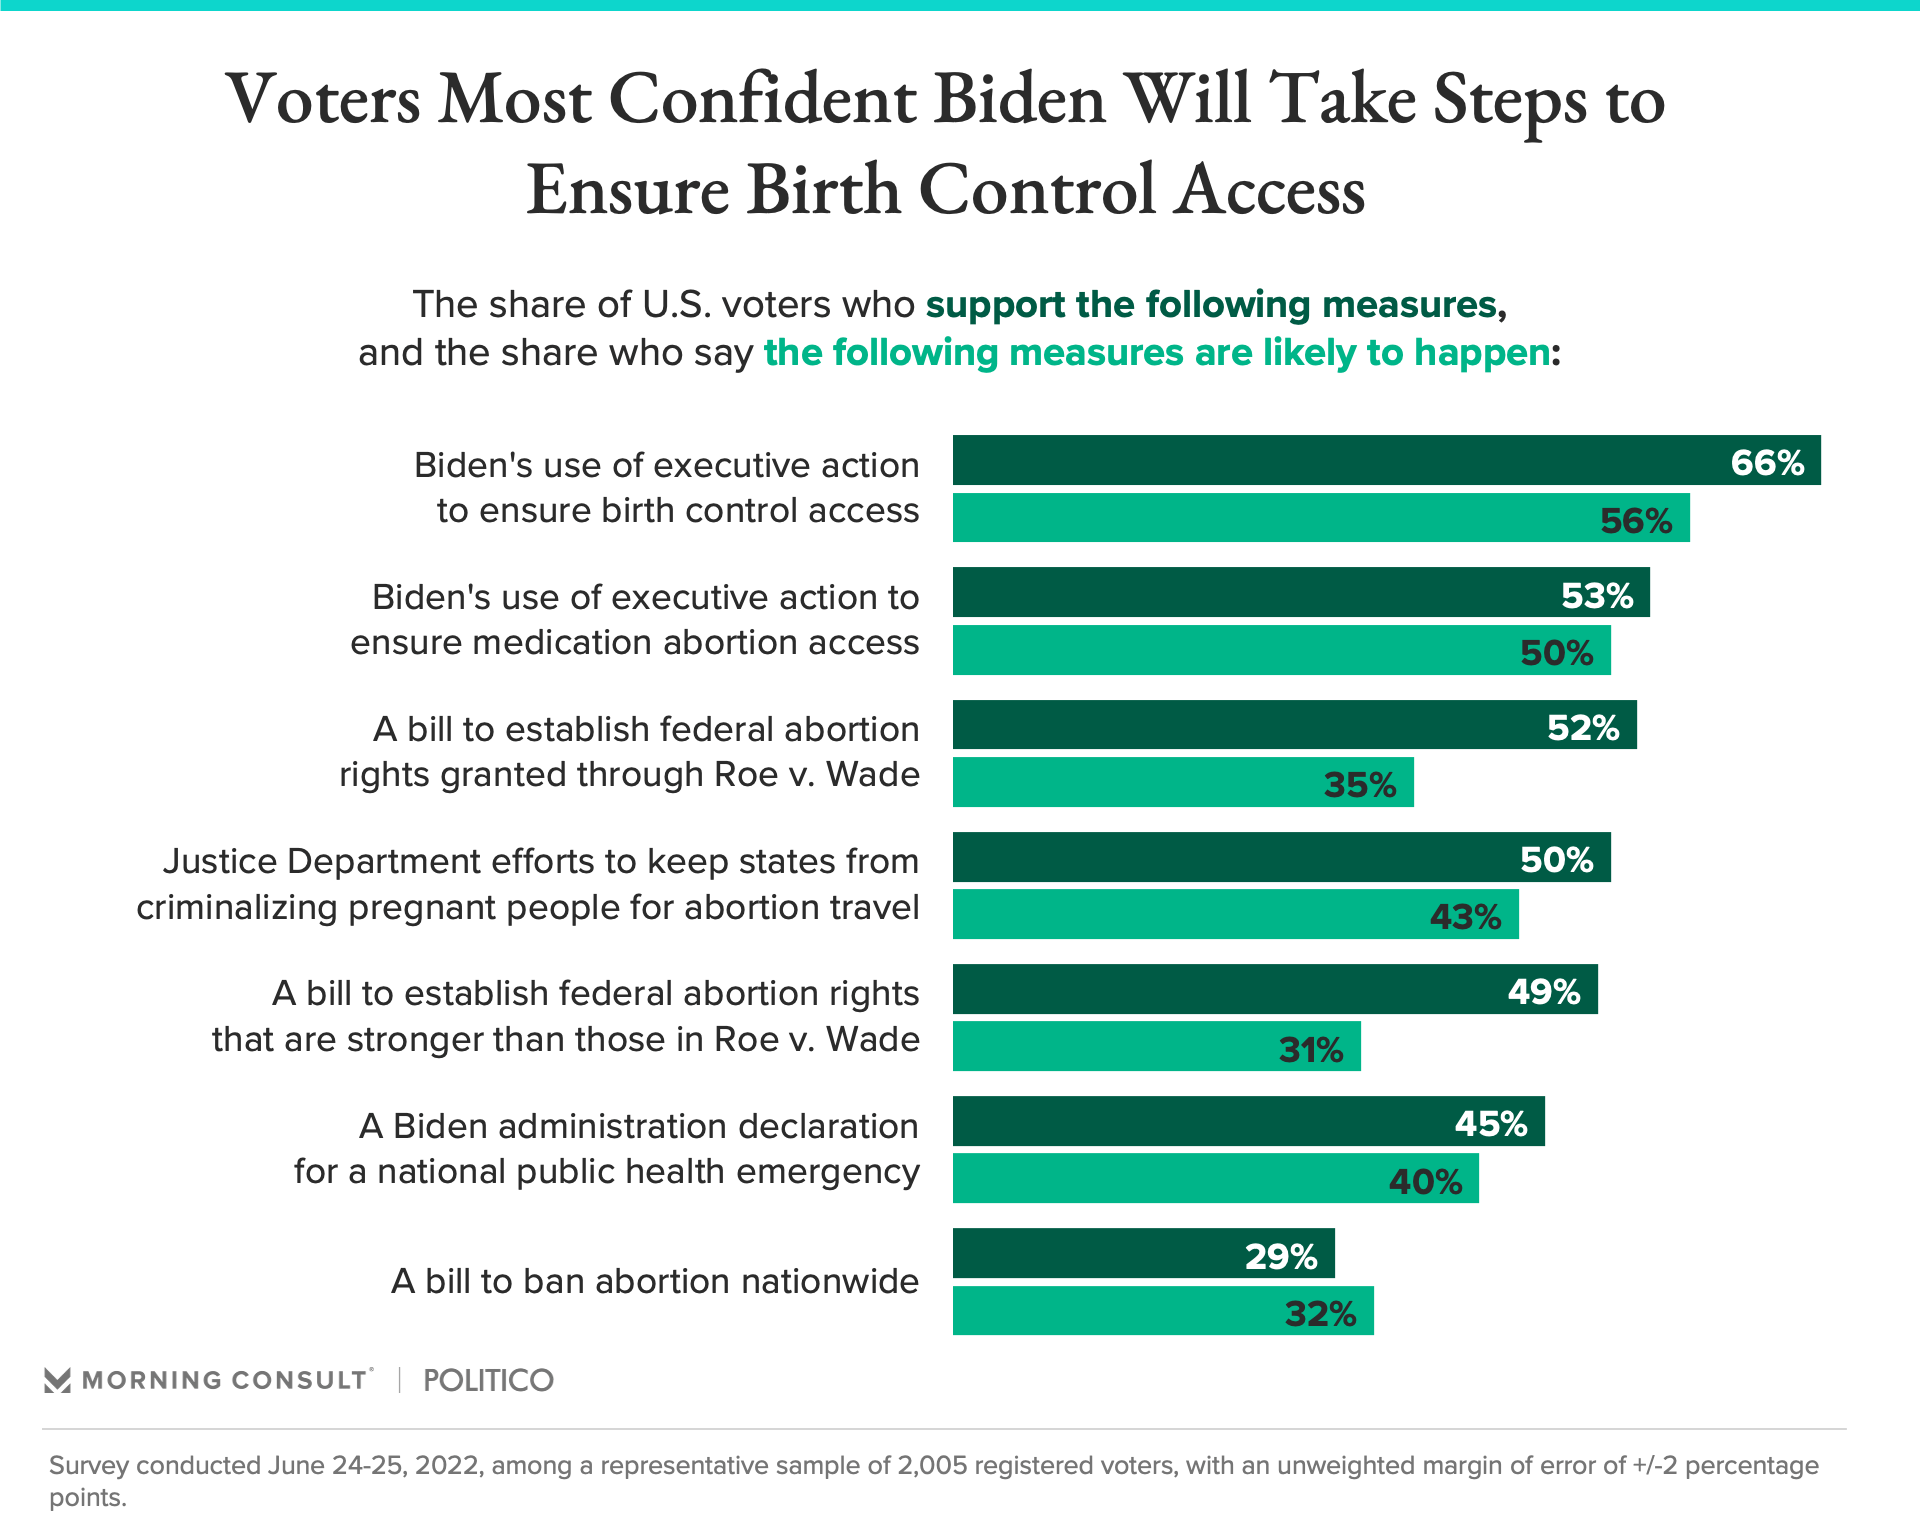 Voters are confident Biden will take steps to ensure birth control access